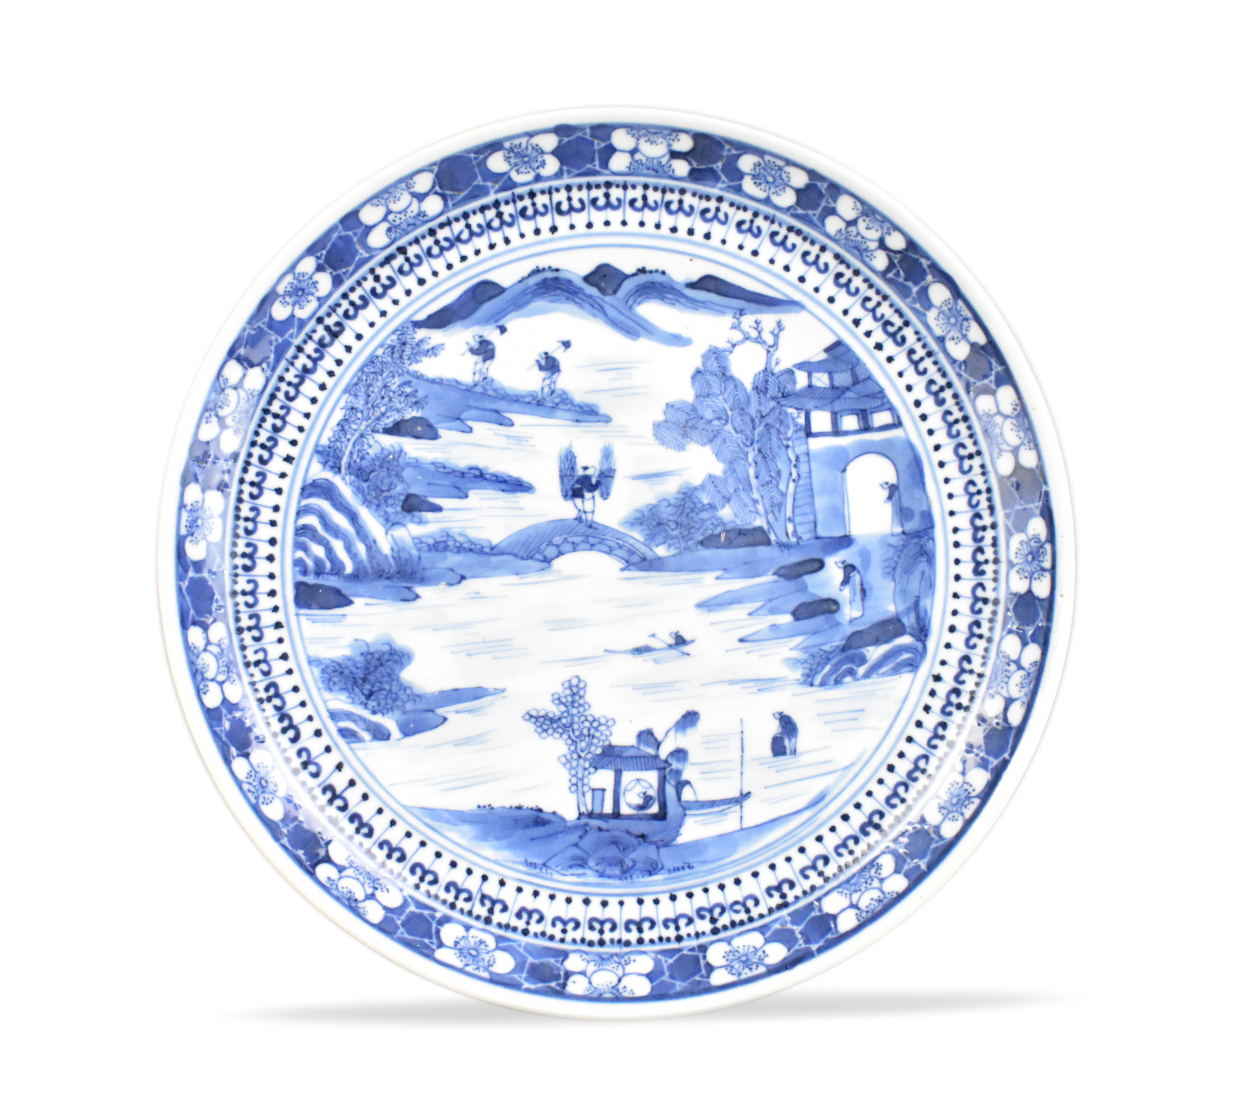 CHINESE BLUE & WHITE DISH W/ LANDSCAPE,19TH